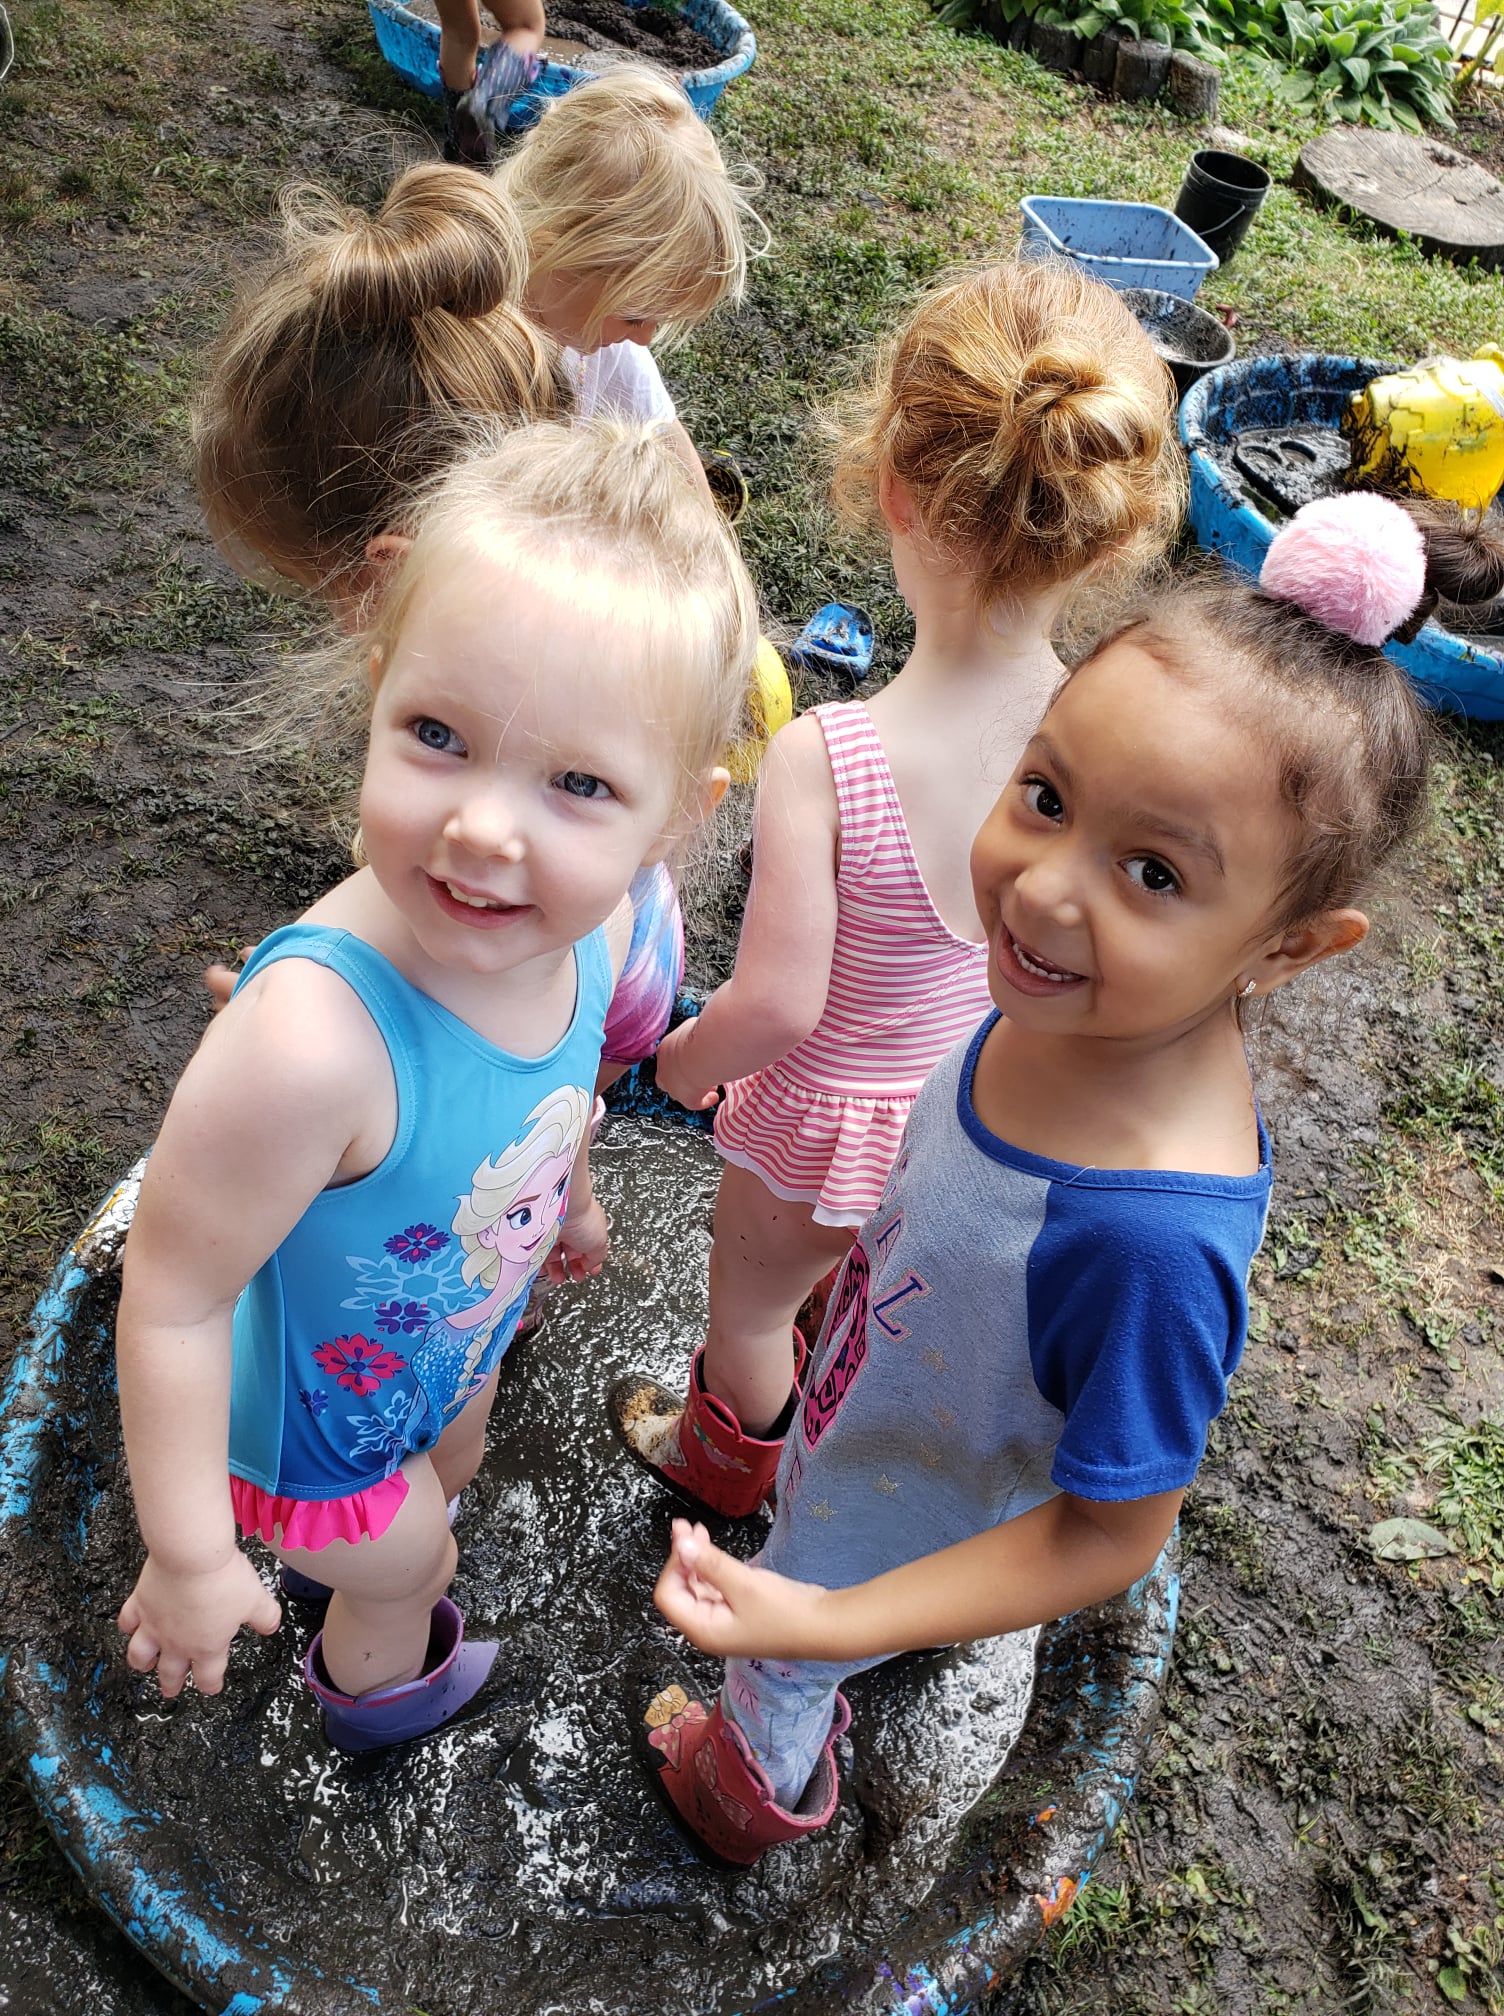 chuck evance recommends girls playing in mud pic